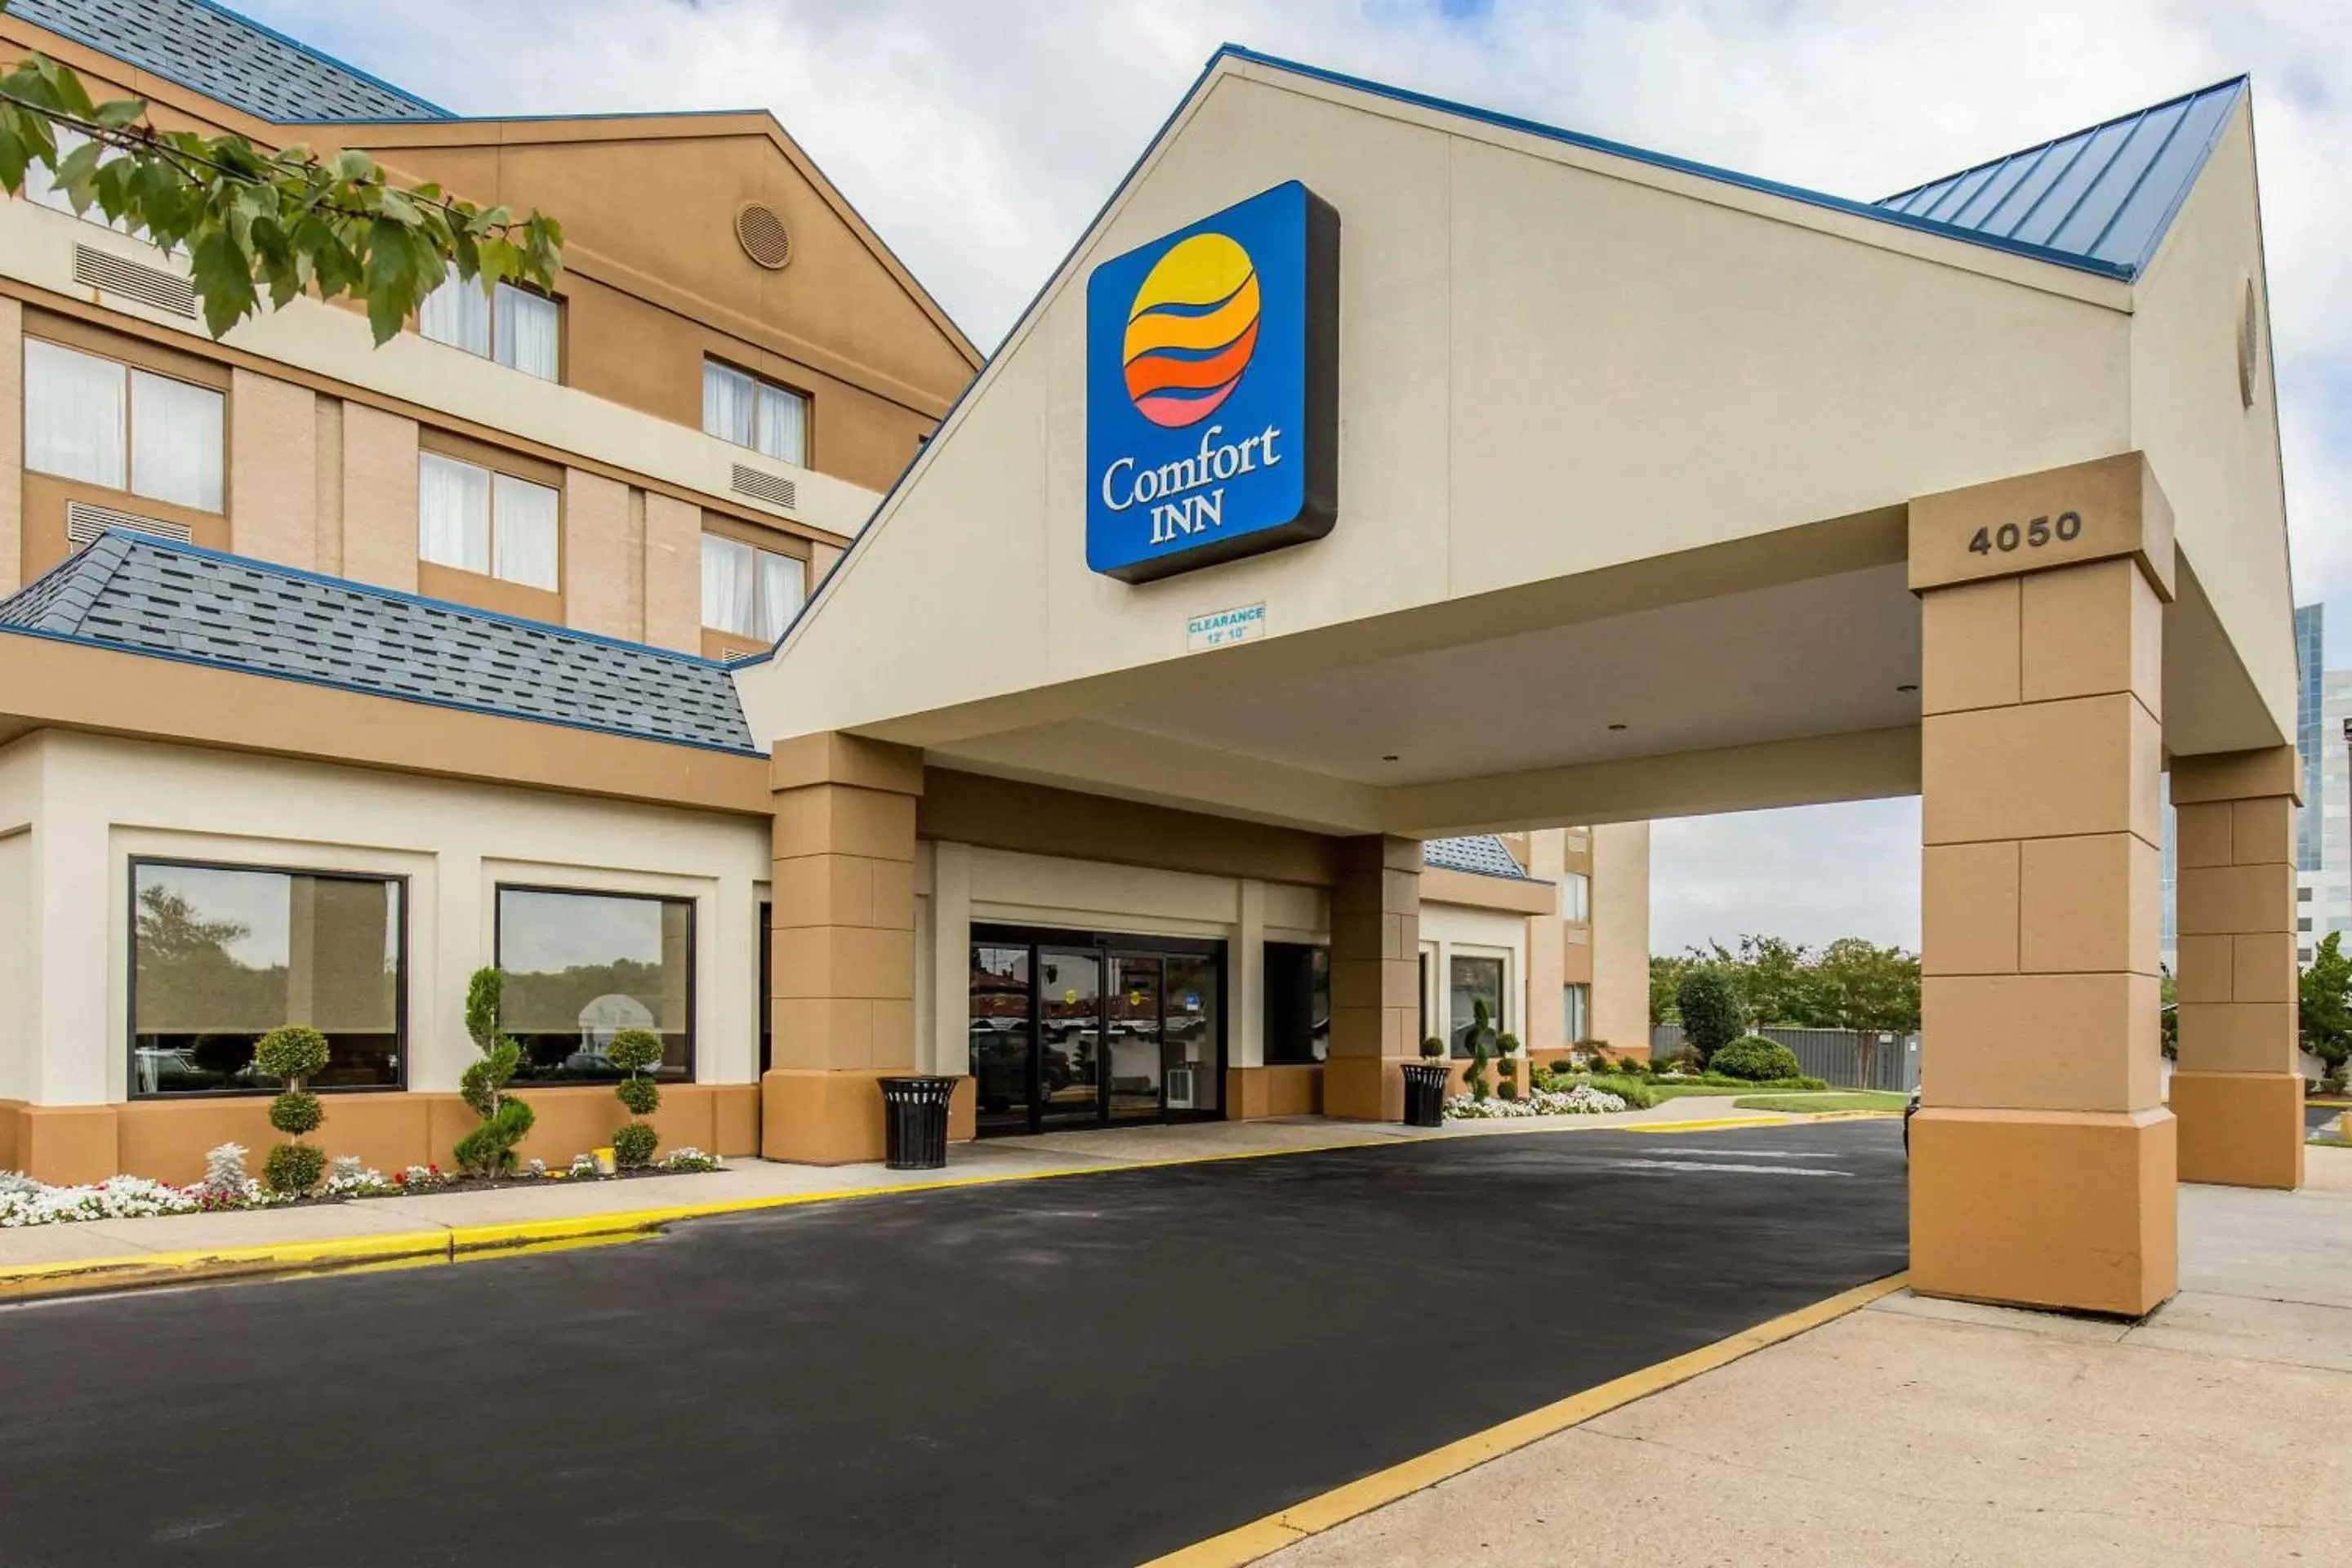 Property building in Comfort Inn College Park North